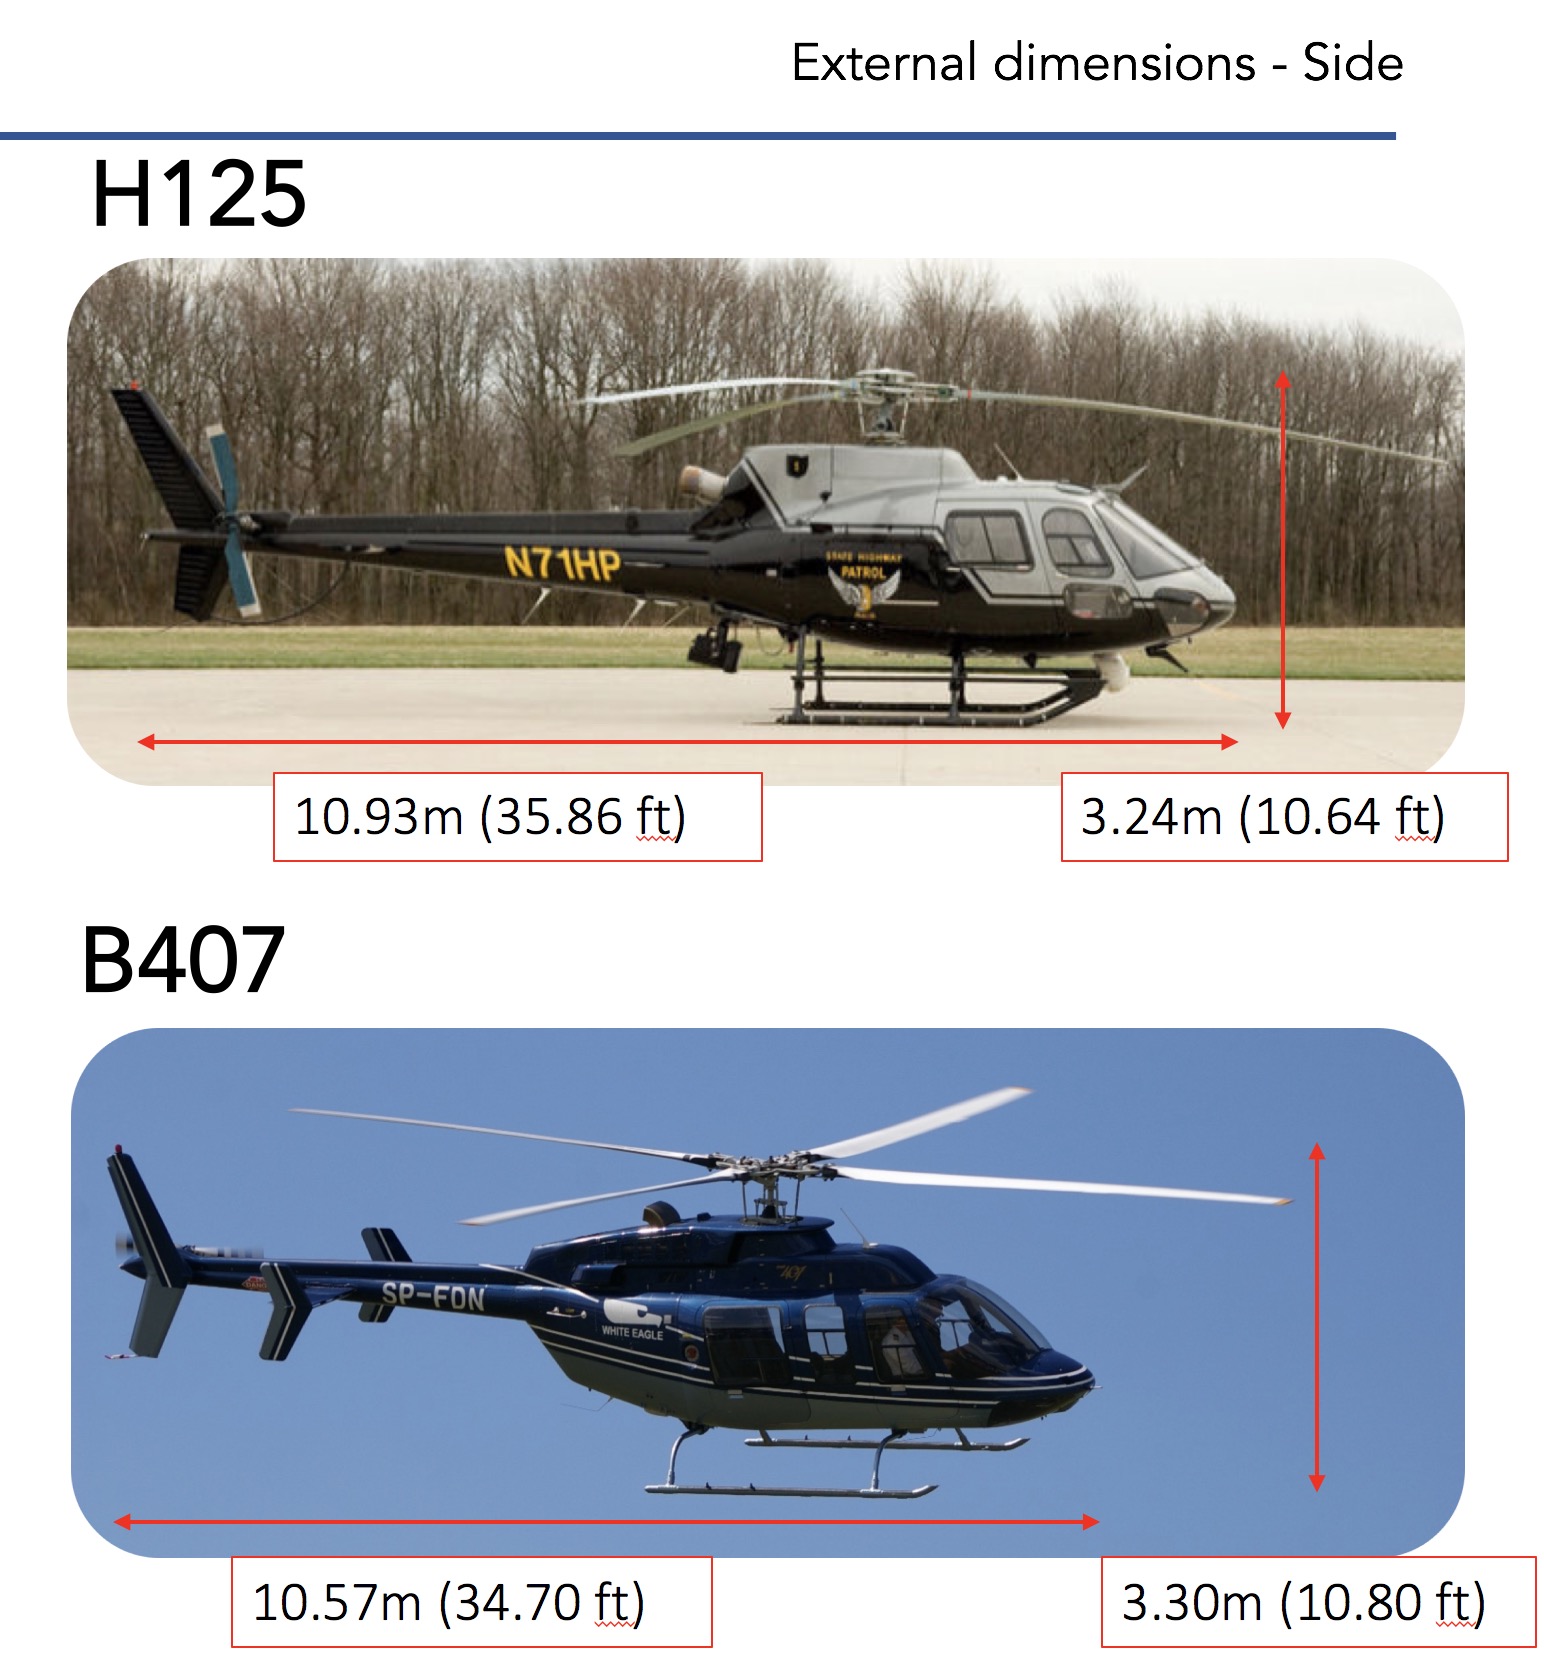 Externl dimensions - Airbus H125 and Bell 407